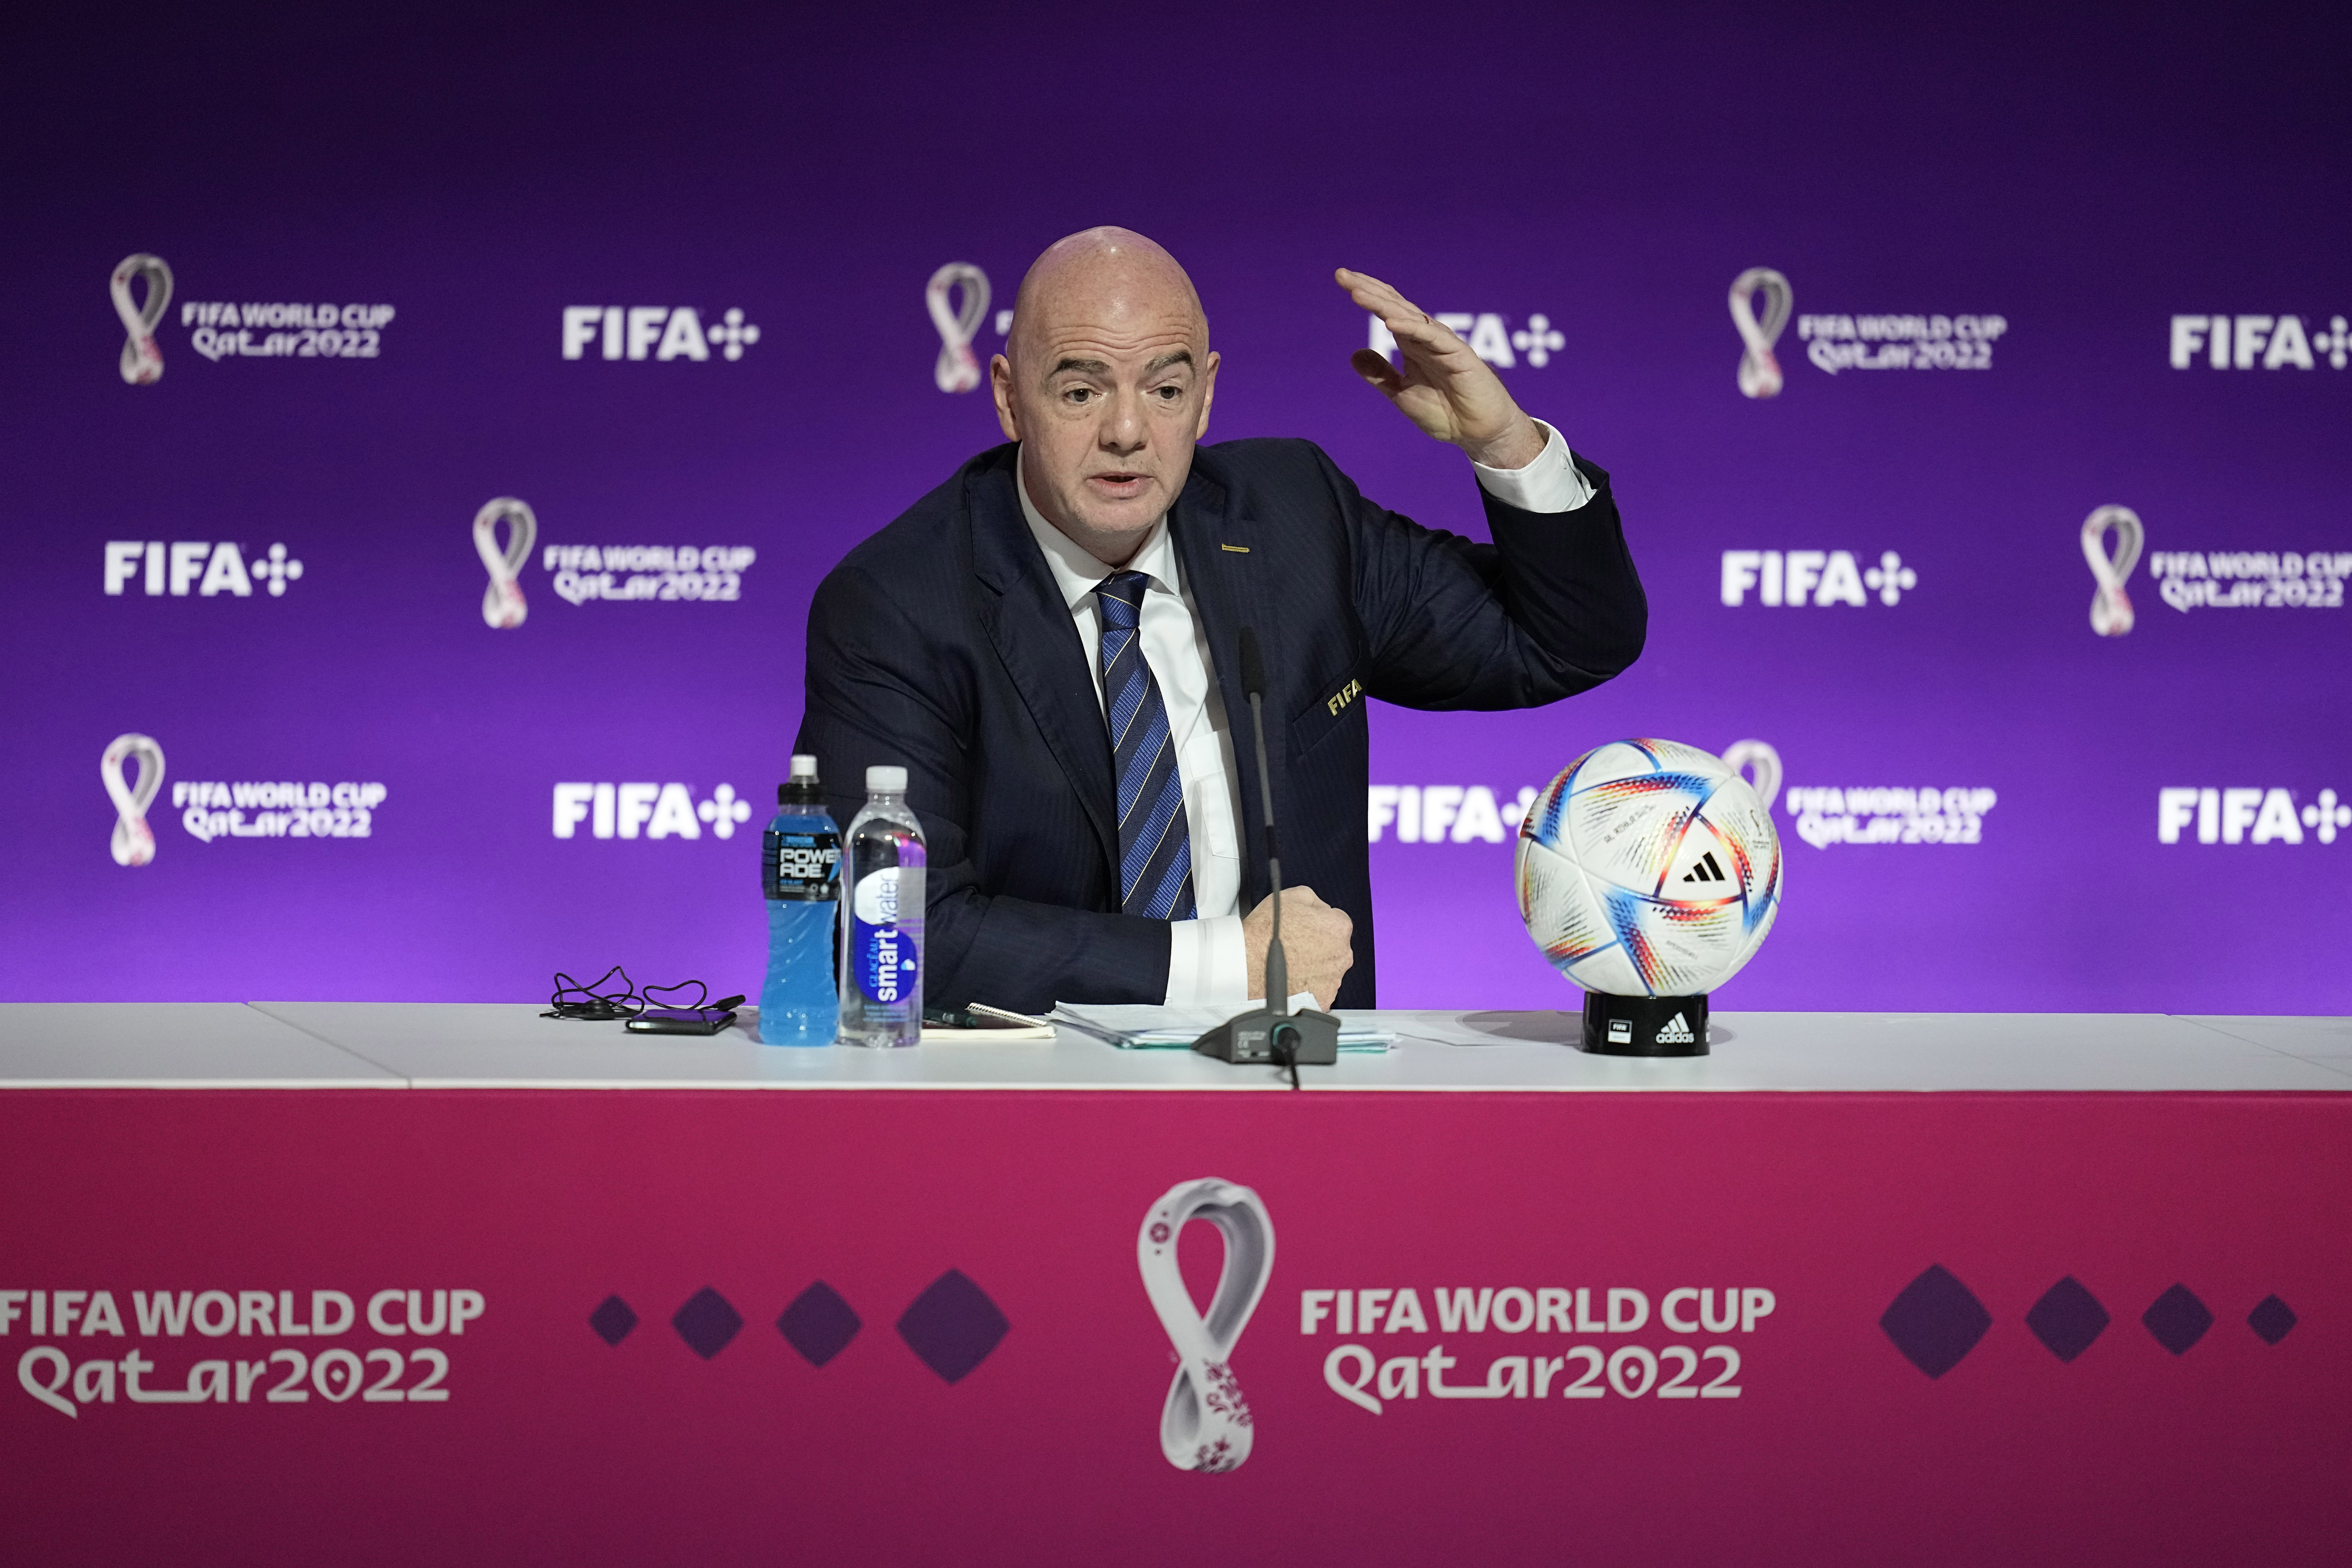 Infantino shows his anger at a press conference during the World Cup in Qatar